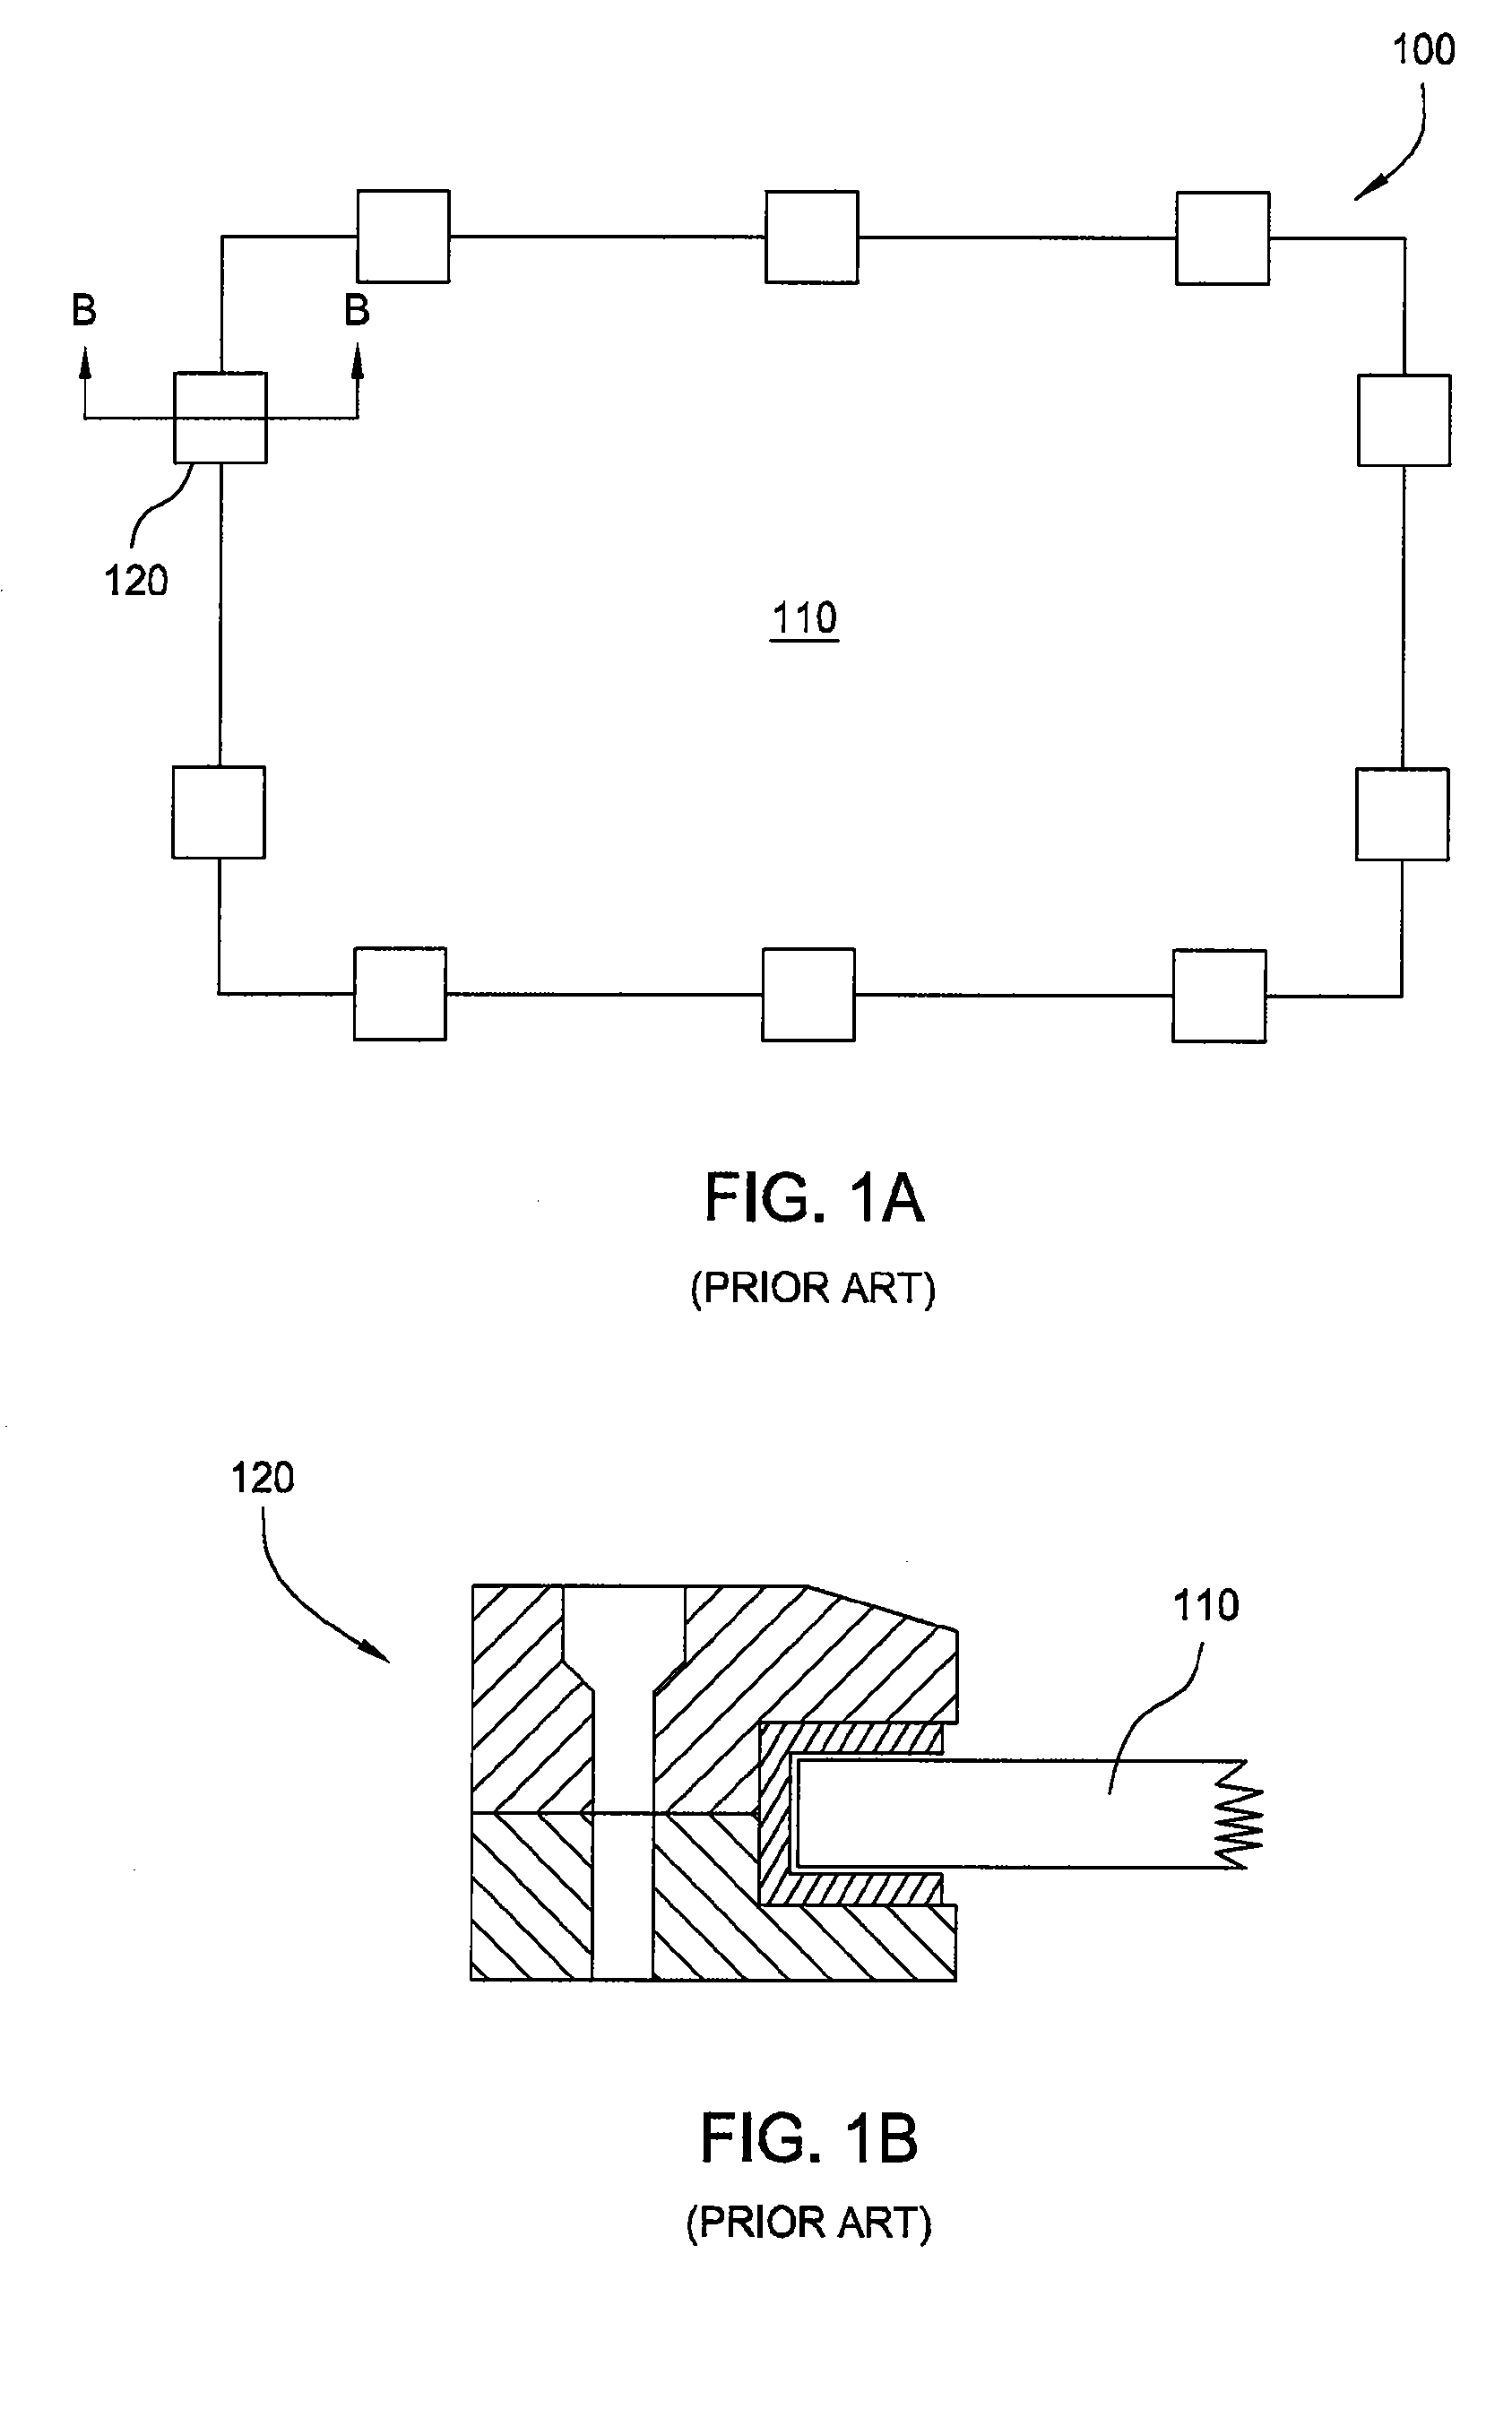 Apparatus and method of mounting and supporting a solar panel